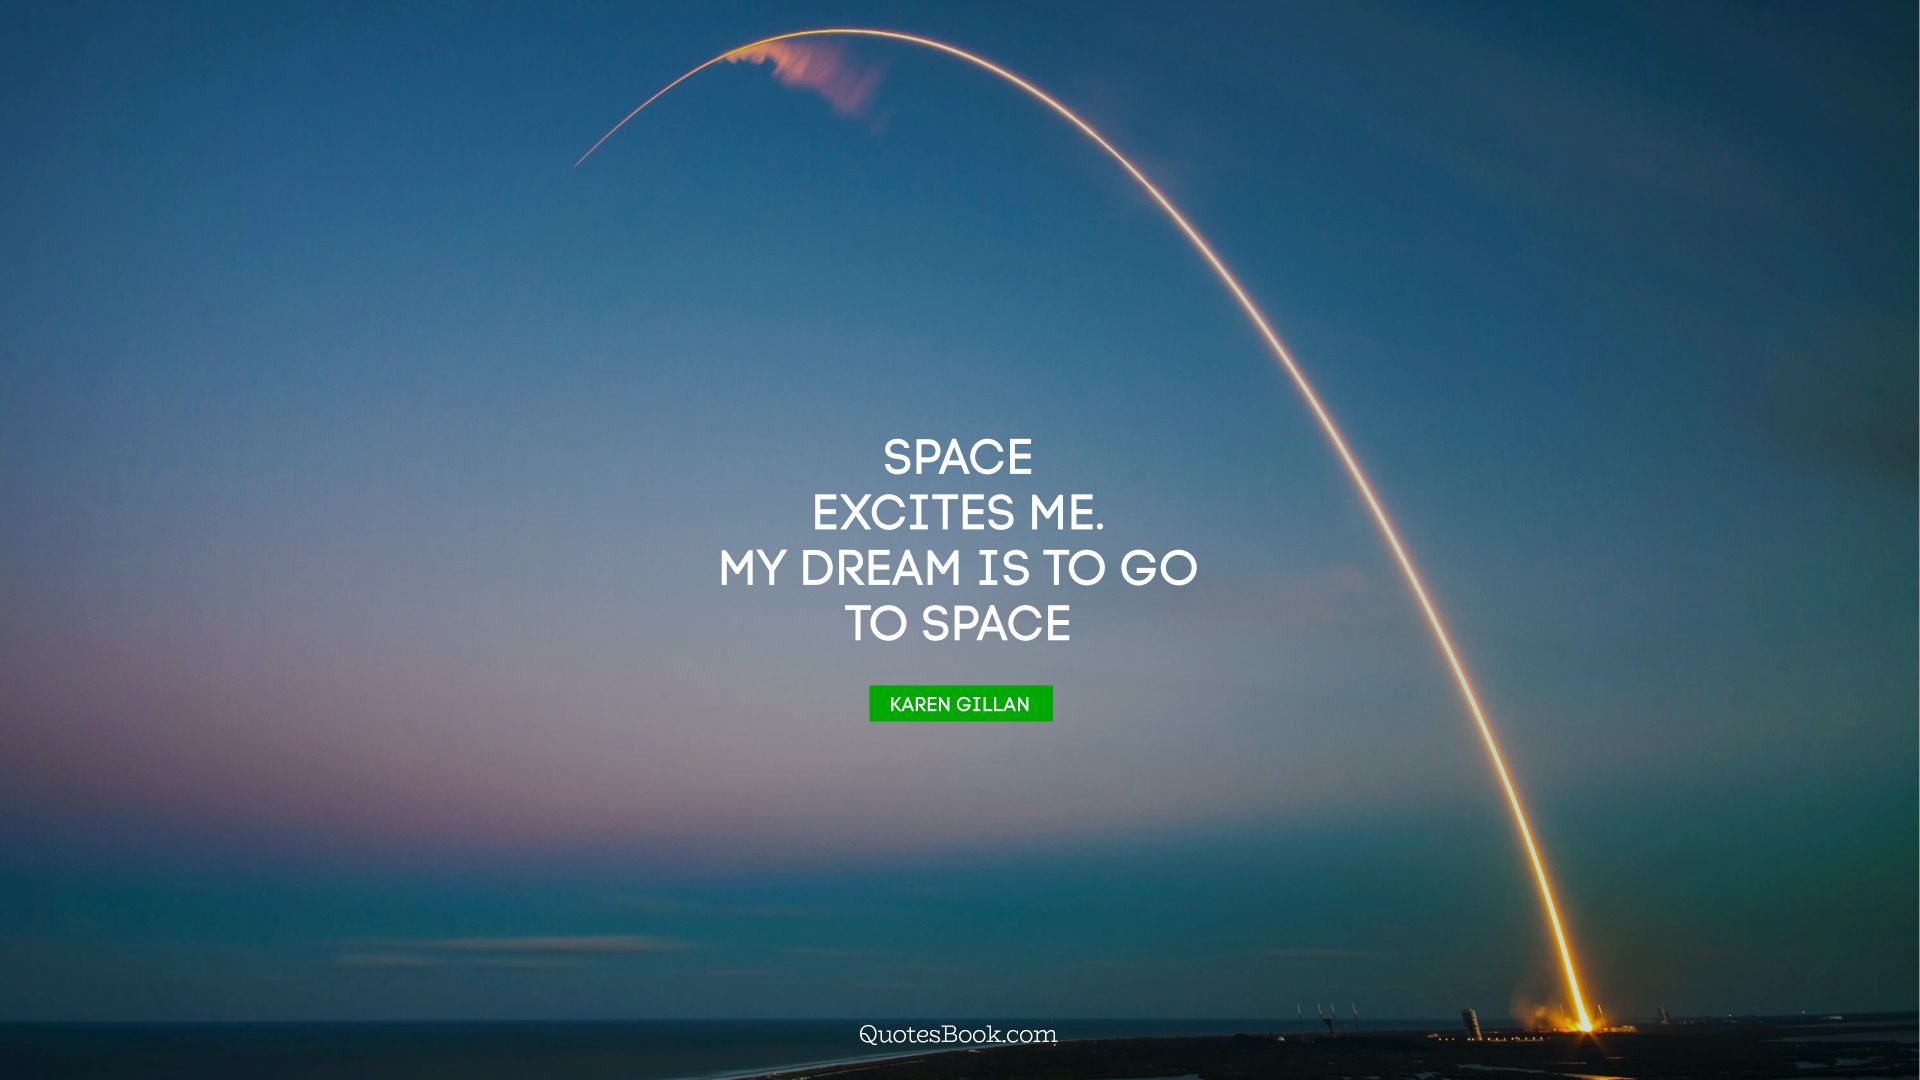 Space excites me. My dream is to go to space. - Quote by Karen Gillan